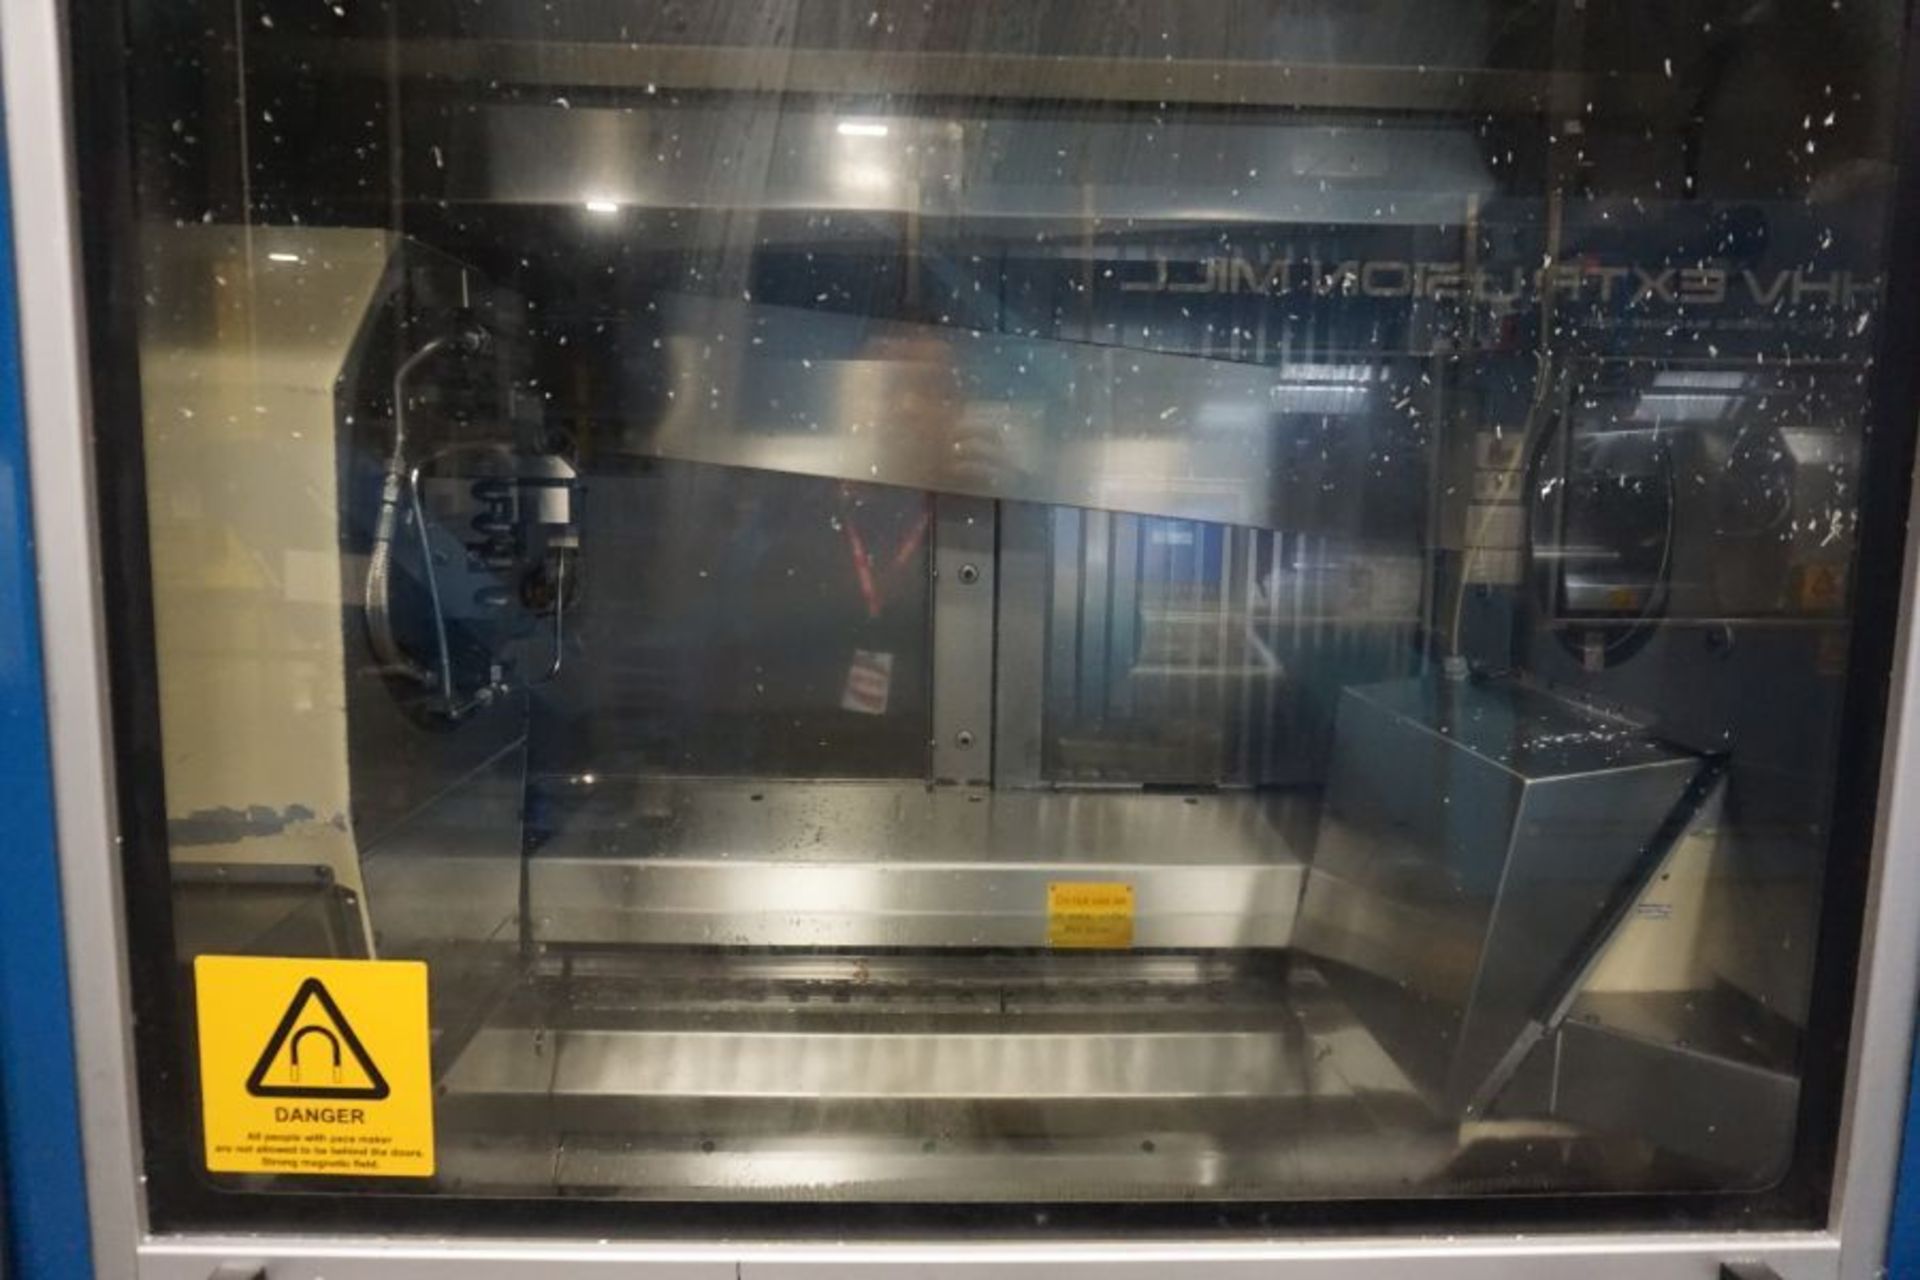 2014, Modig HHV 4-Axis High Speed Extrusion Mill, Fanuc 30i Model B, Fischer 1700 MM 30K Spindle - Image 5 of 9